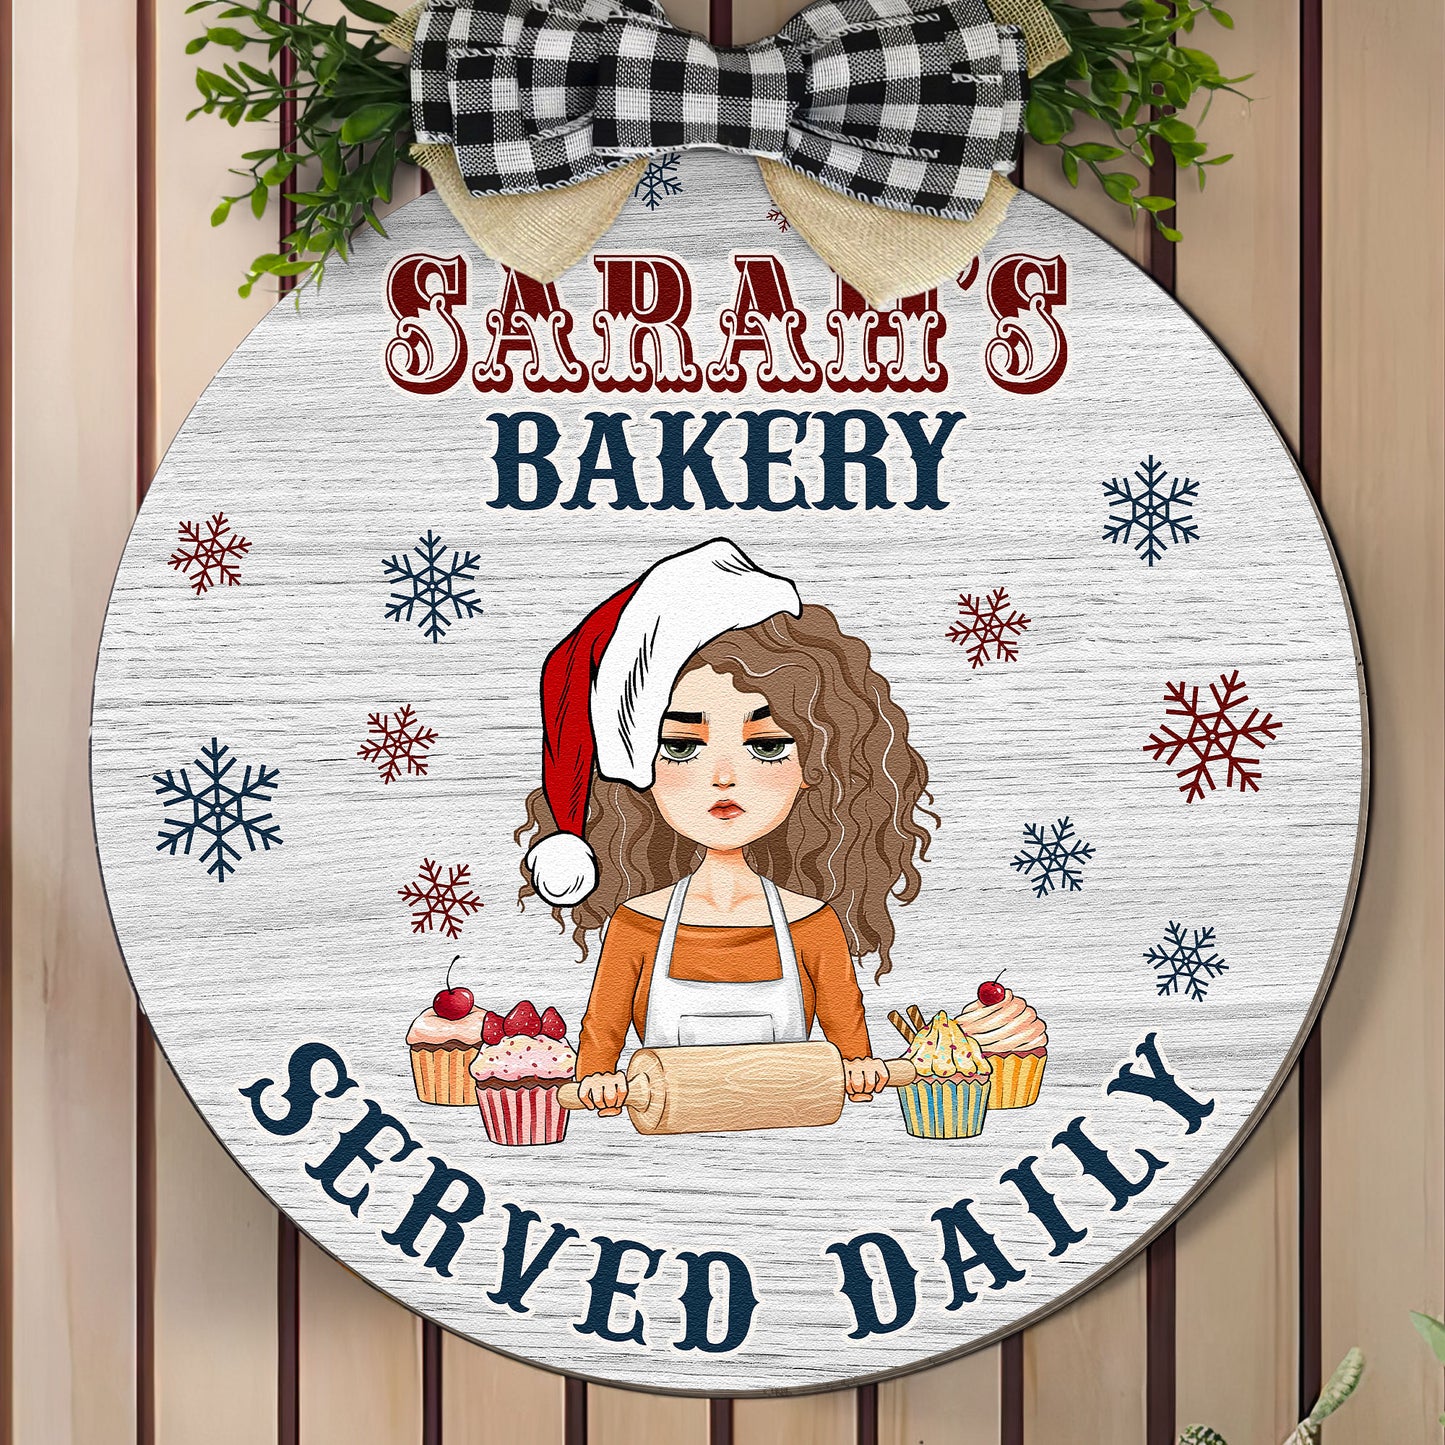 Christmas Bakery Served Daily - Personalized Wood Wreath